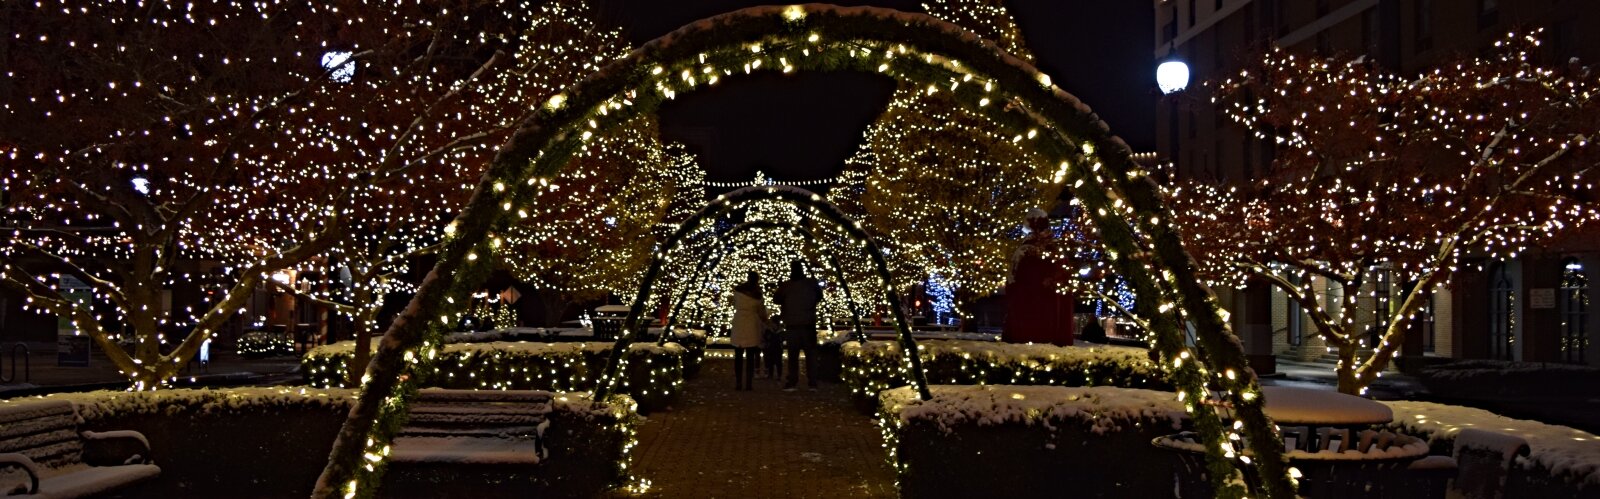 Downtown Springfield is lit up in a whole new way this year, creating an experience to attract people to the area this winter.